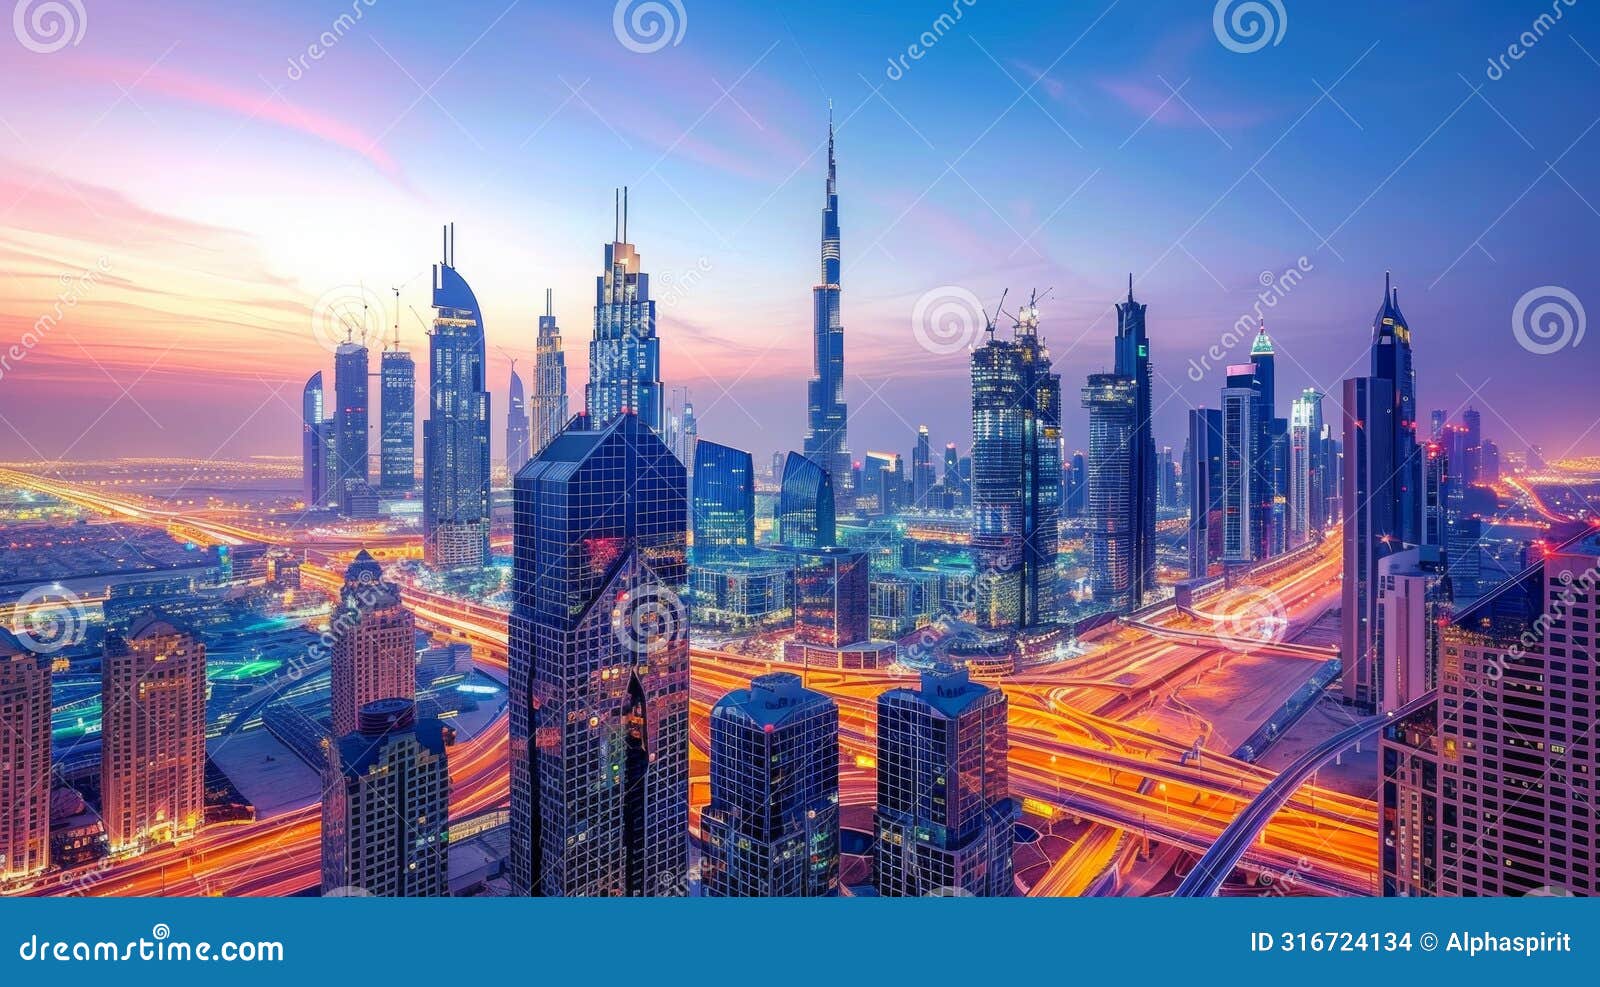 panoramic view of the high rises along sheikh zayed road in glowing twilight hues